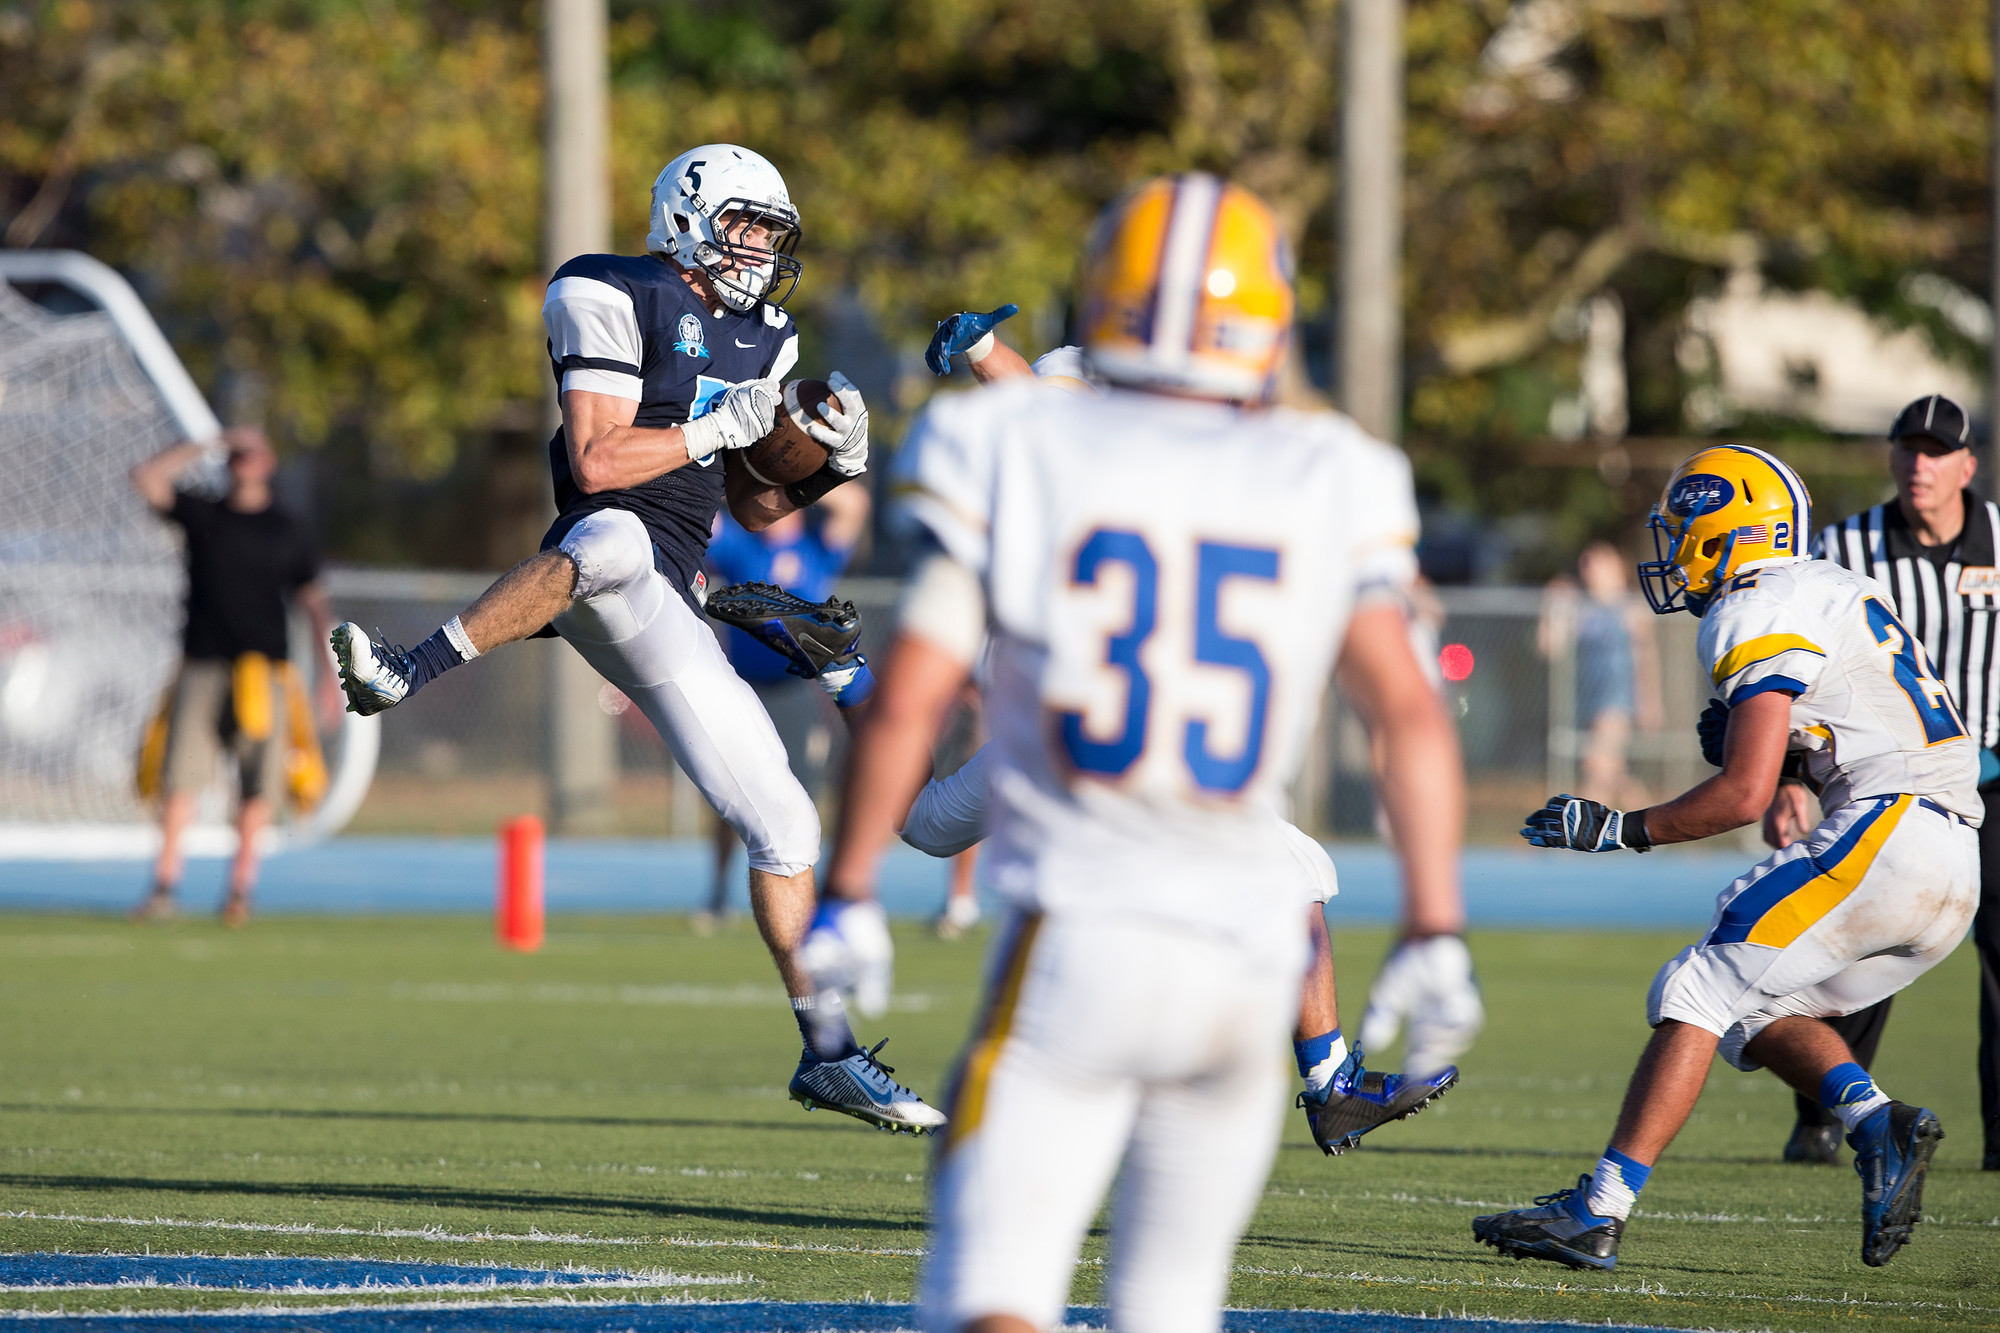 Senior receiver Mike Checco went up high to snare a pass from Vincent Guarino. The pair hooked up for a 27-yard touchdown pass in the fourth quarter.